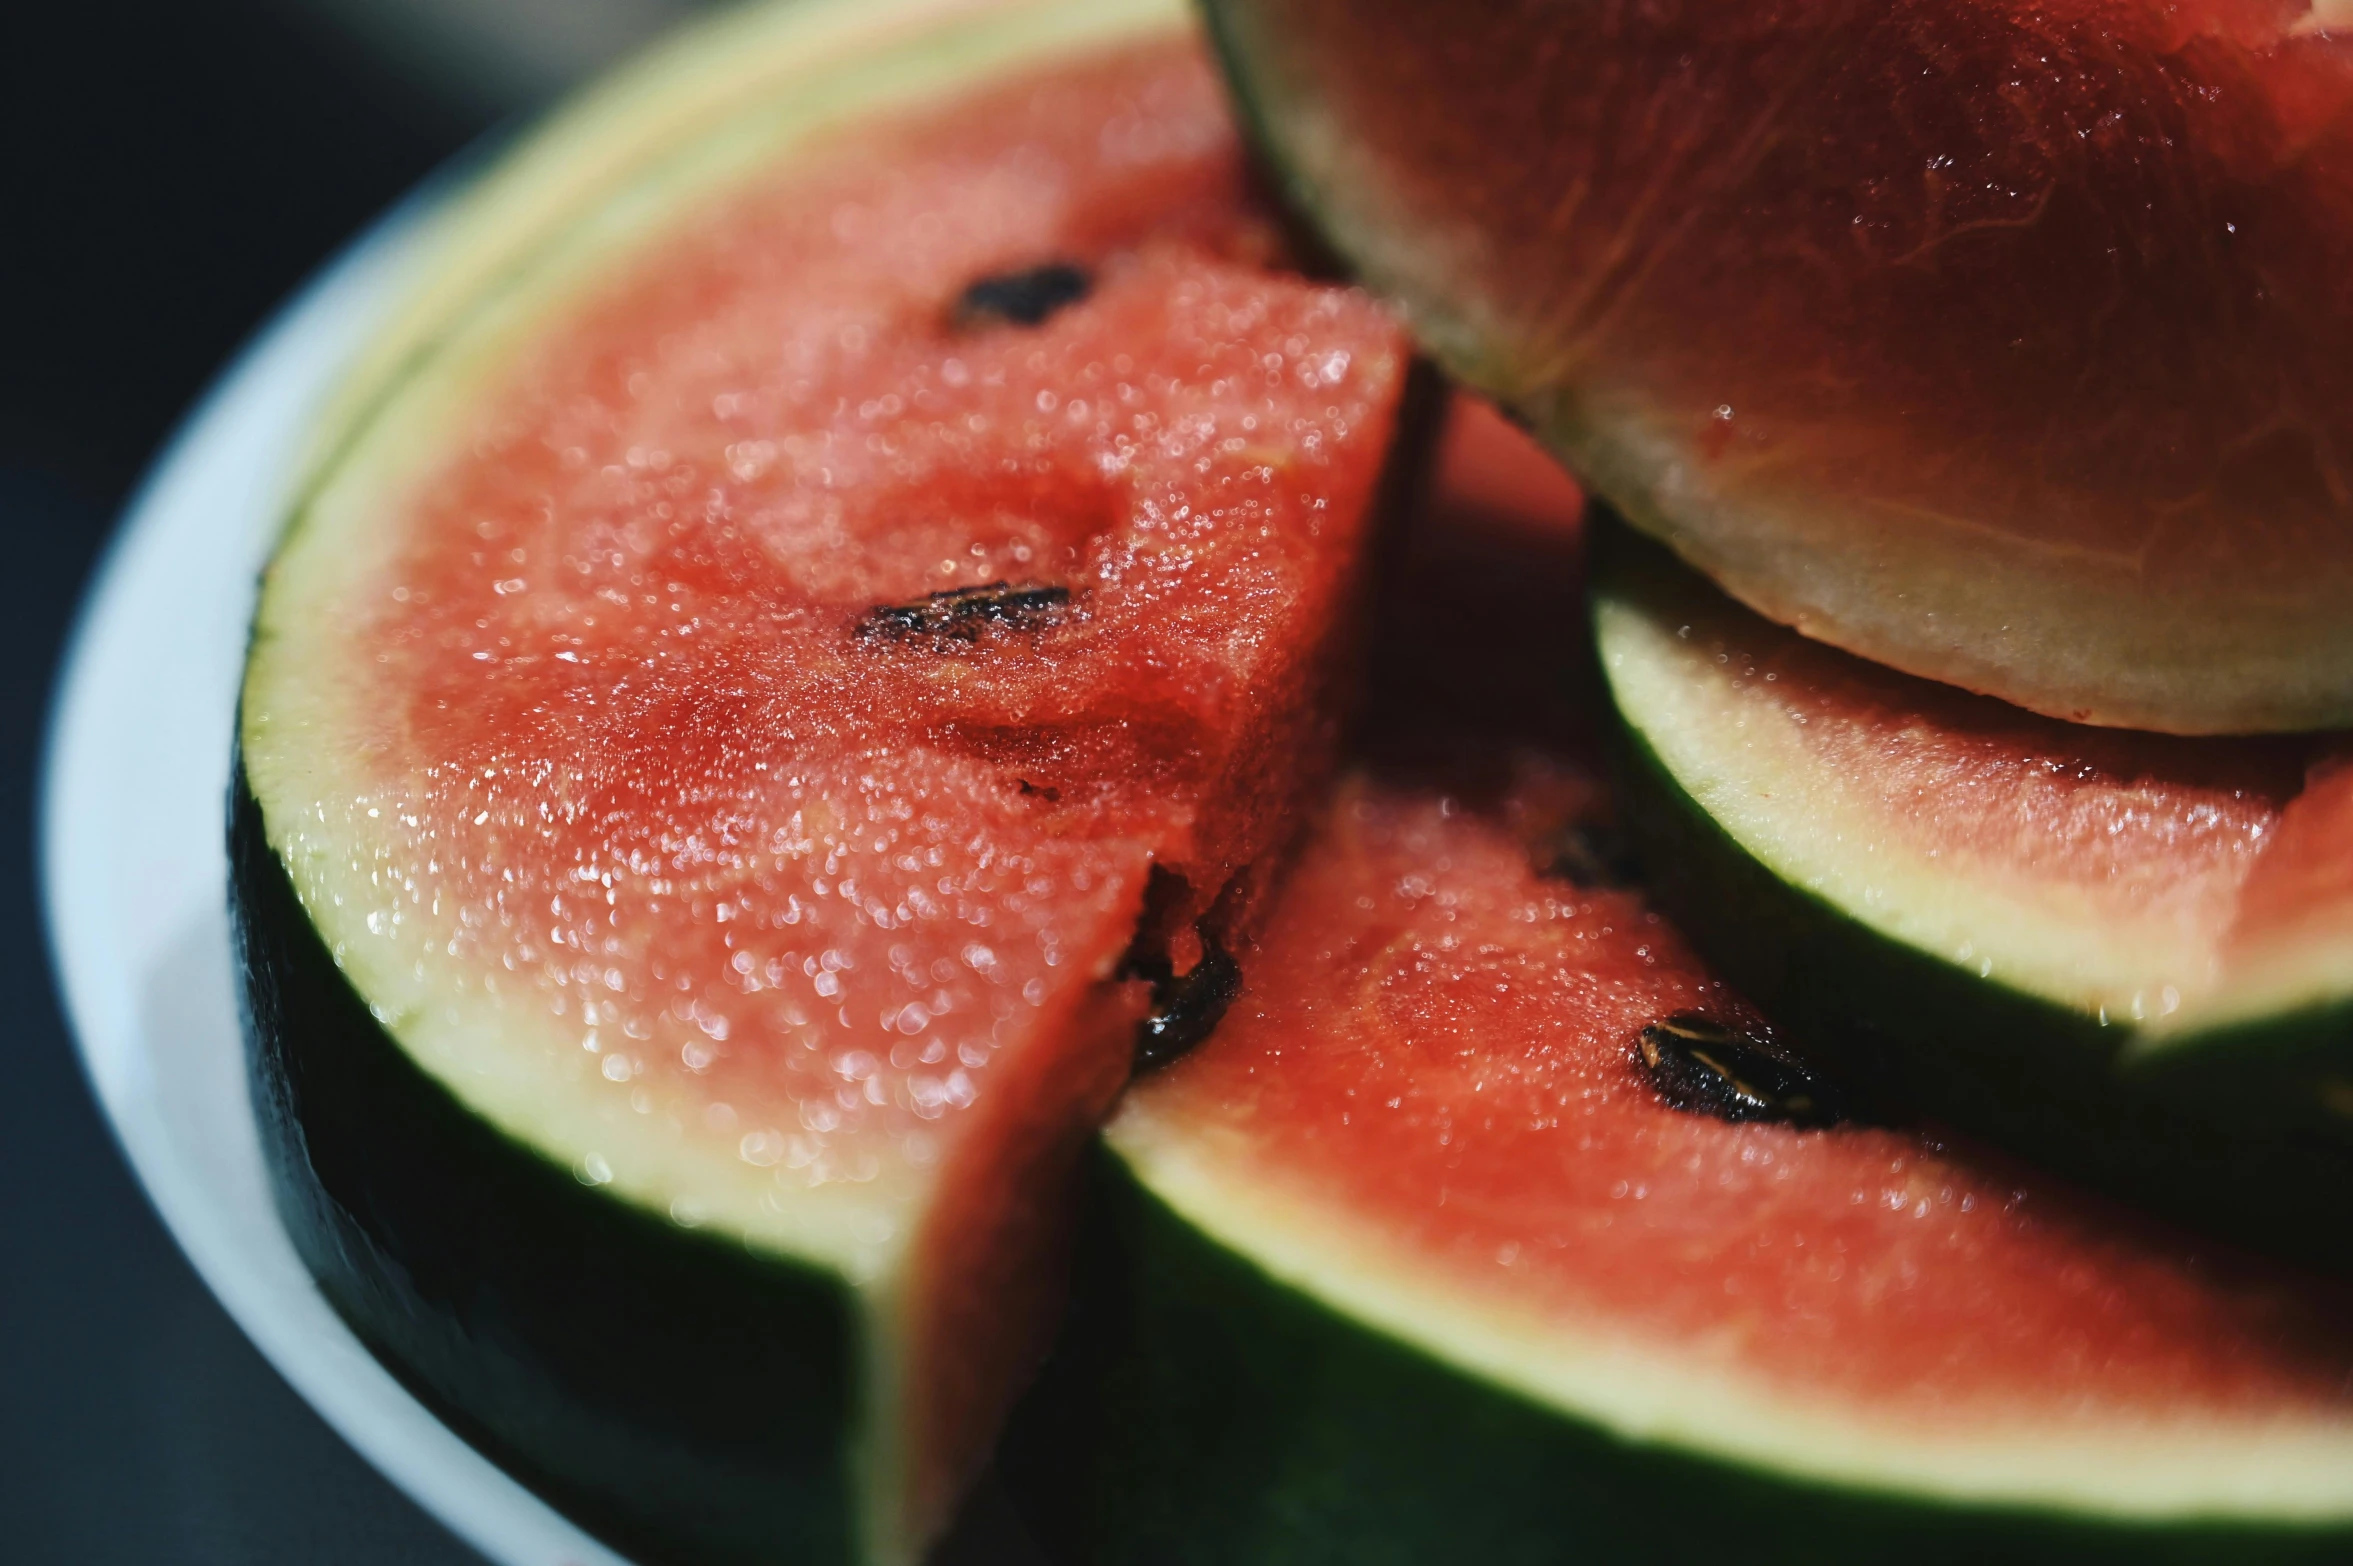 slices of watermelon sit on a plate